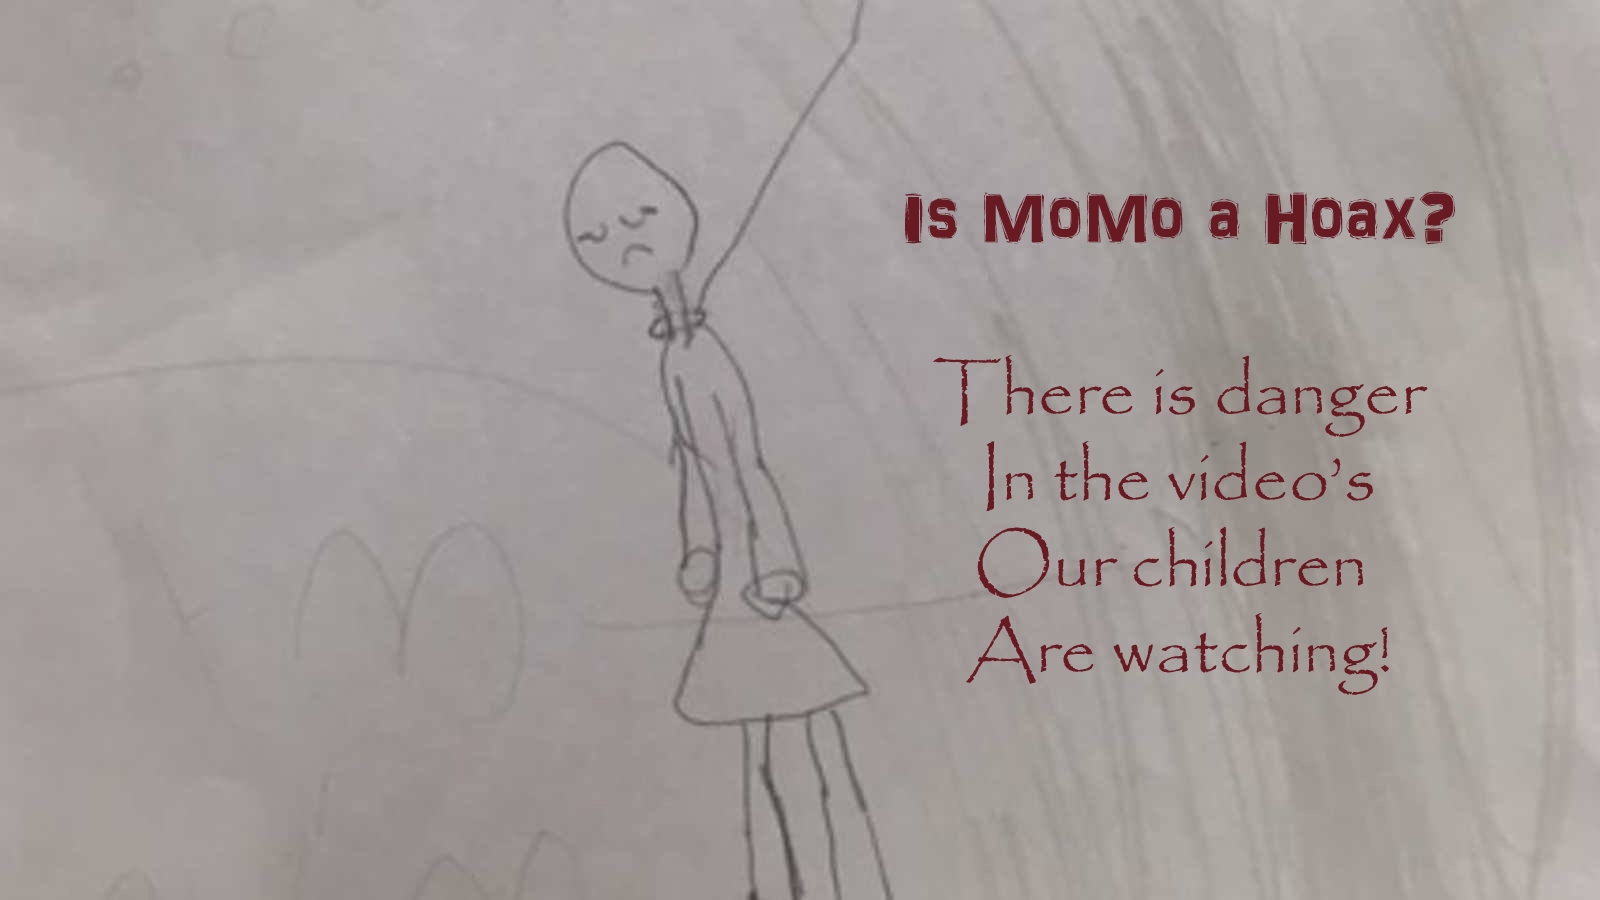 Is Momo a hoax? But this video is not.